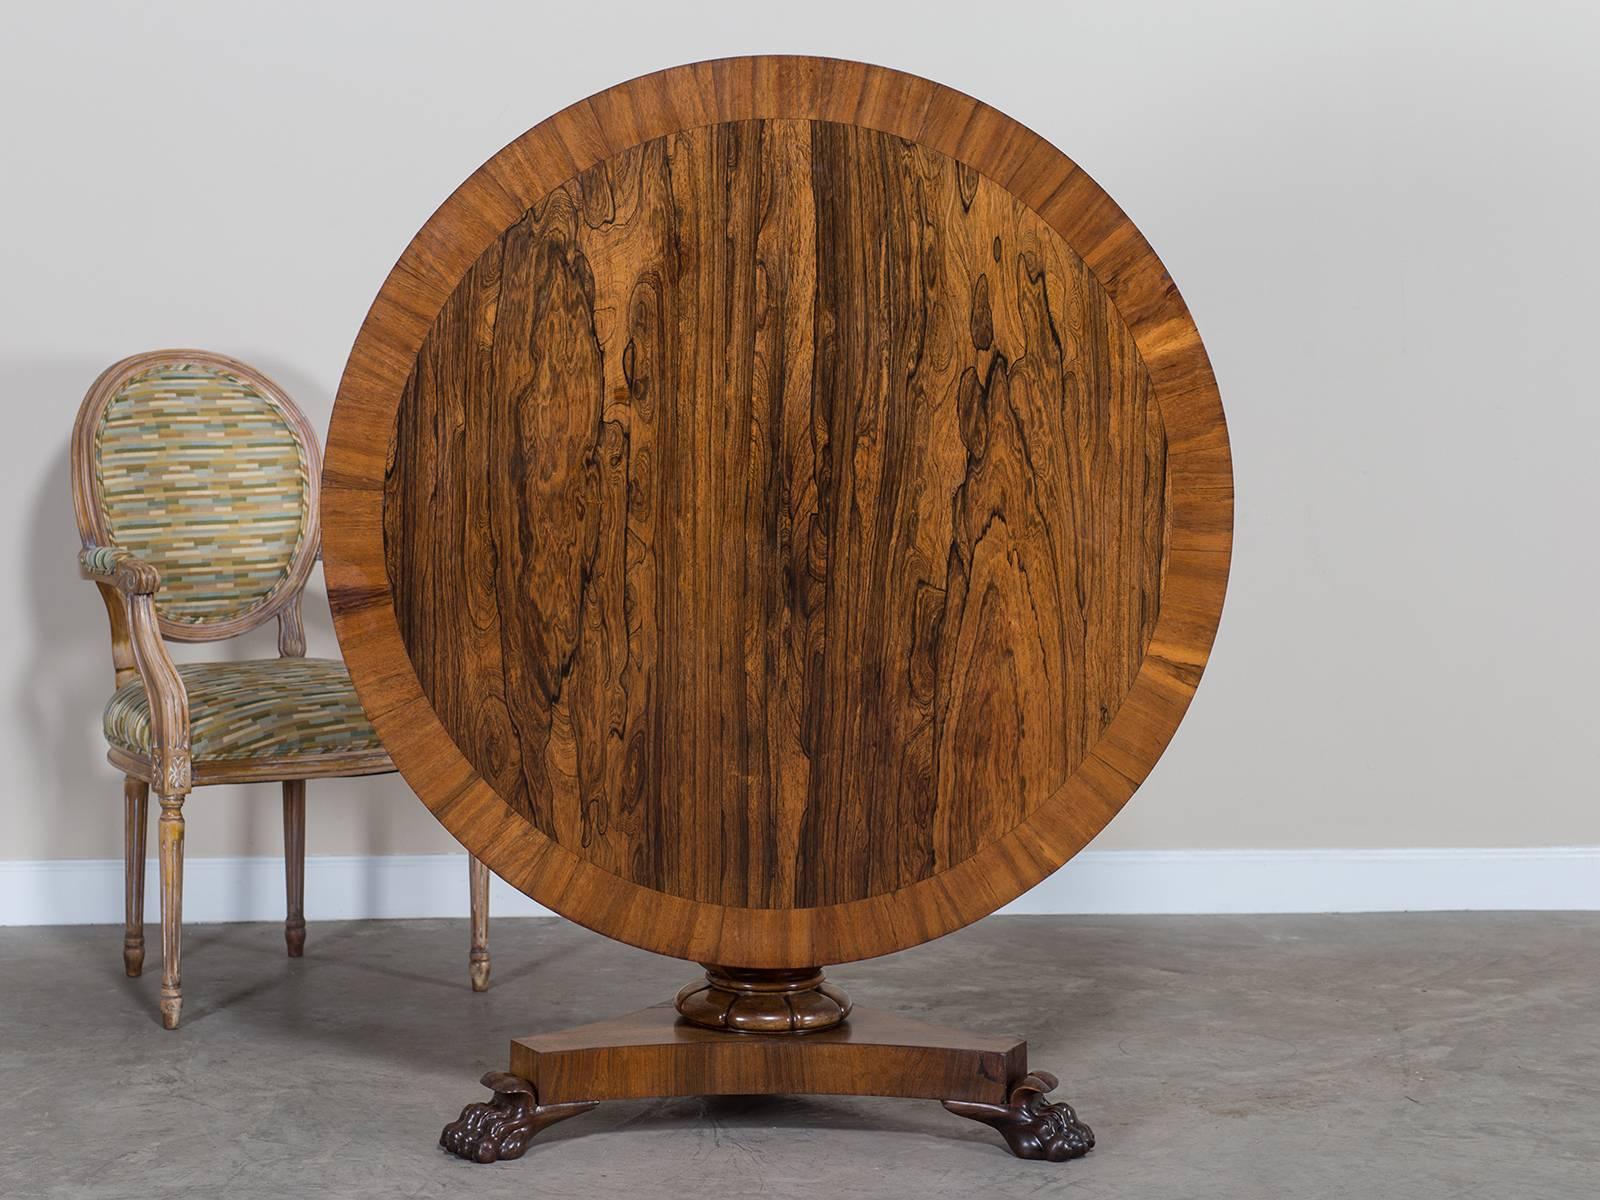 Receive our new selections direct from 1stdibs by email each week. Please click Follow Dealer below and see them first!

The gorgeous rosewood and walnut seen on this antique English tilt-top table, circa 1835 is positively stunning. Constructed